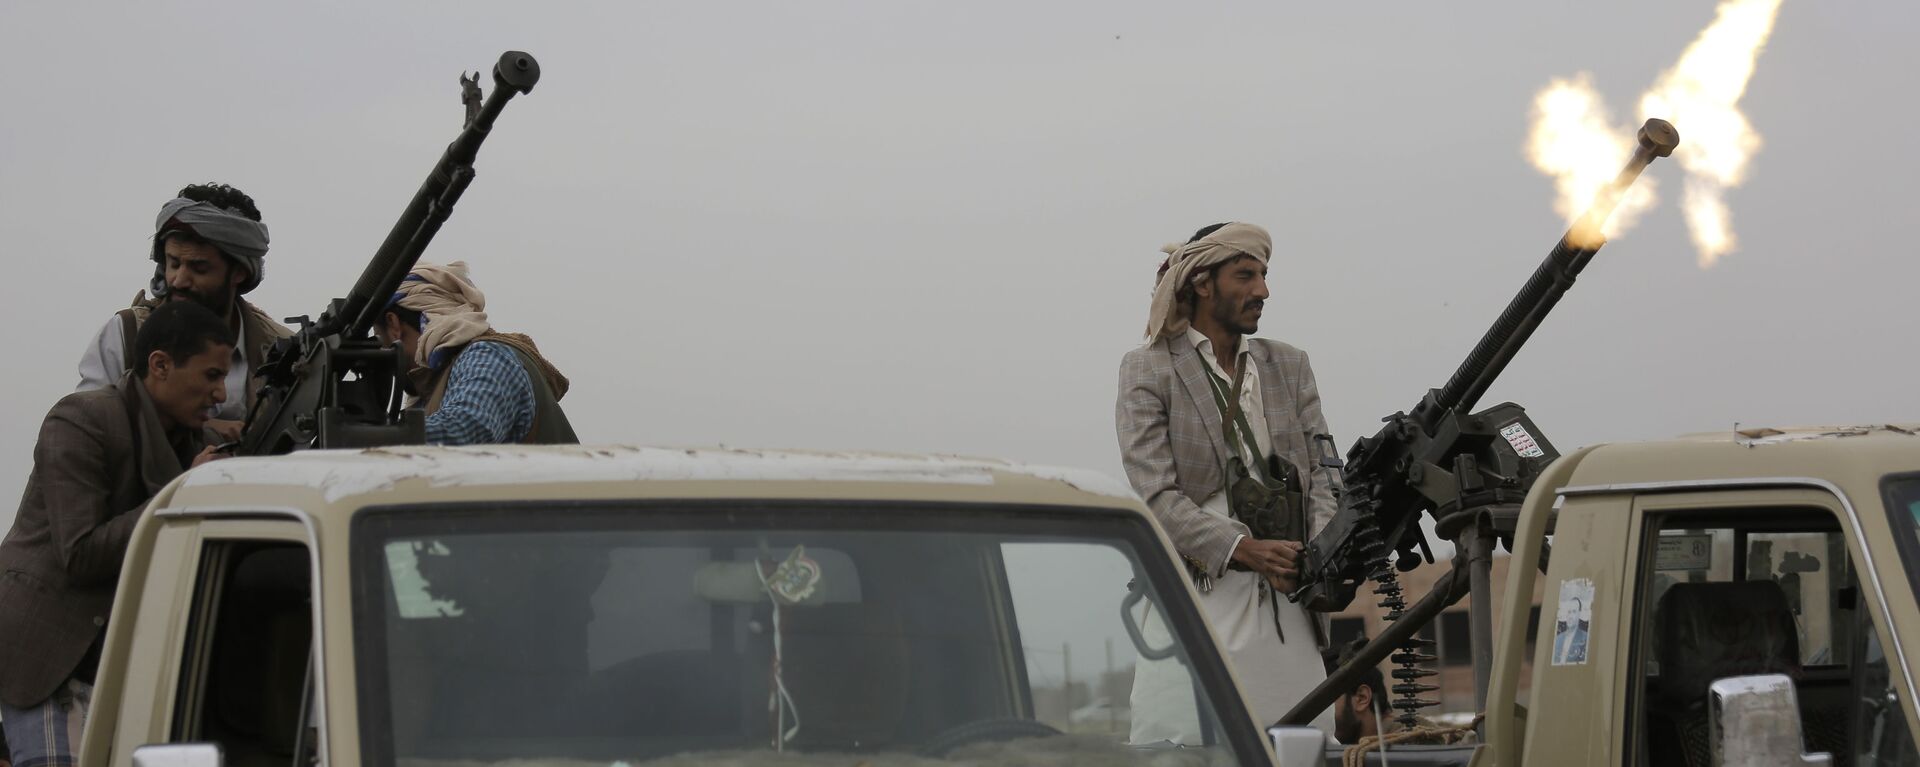 A Houthi rebel fighter fires in the air during a gathering aimed at mobilizing more fighters for the Houthi movement, in Sanaa, Yemen - Sputnik International, 1920, 19.11.2023